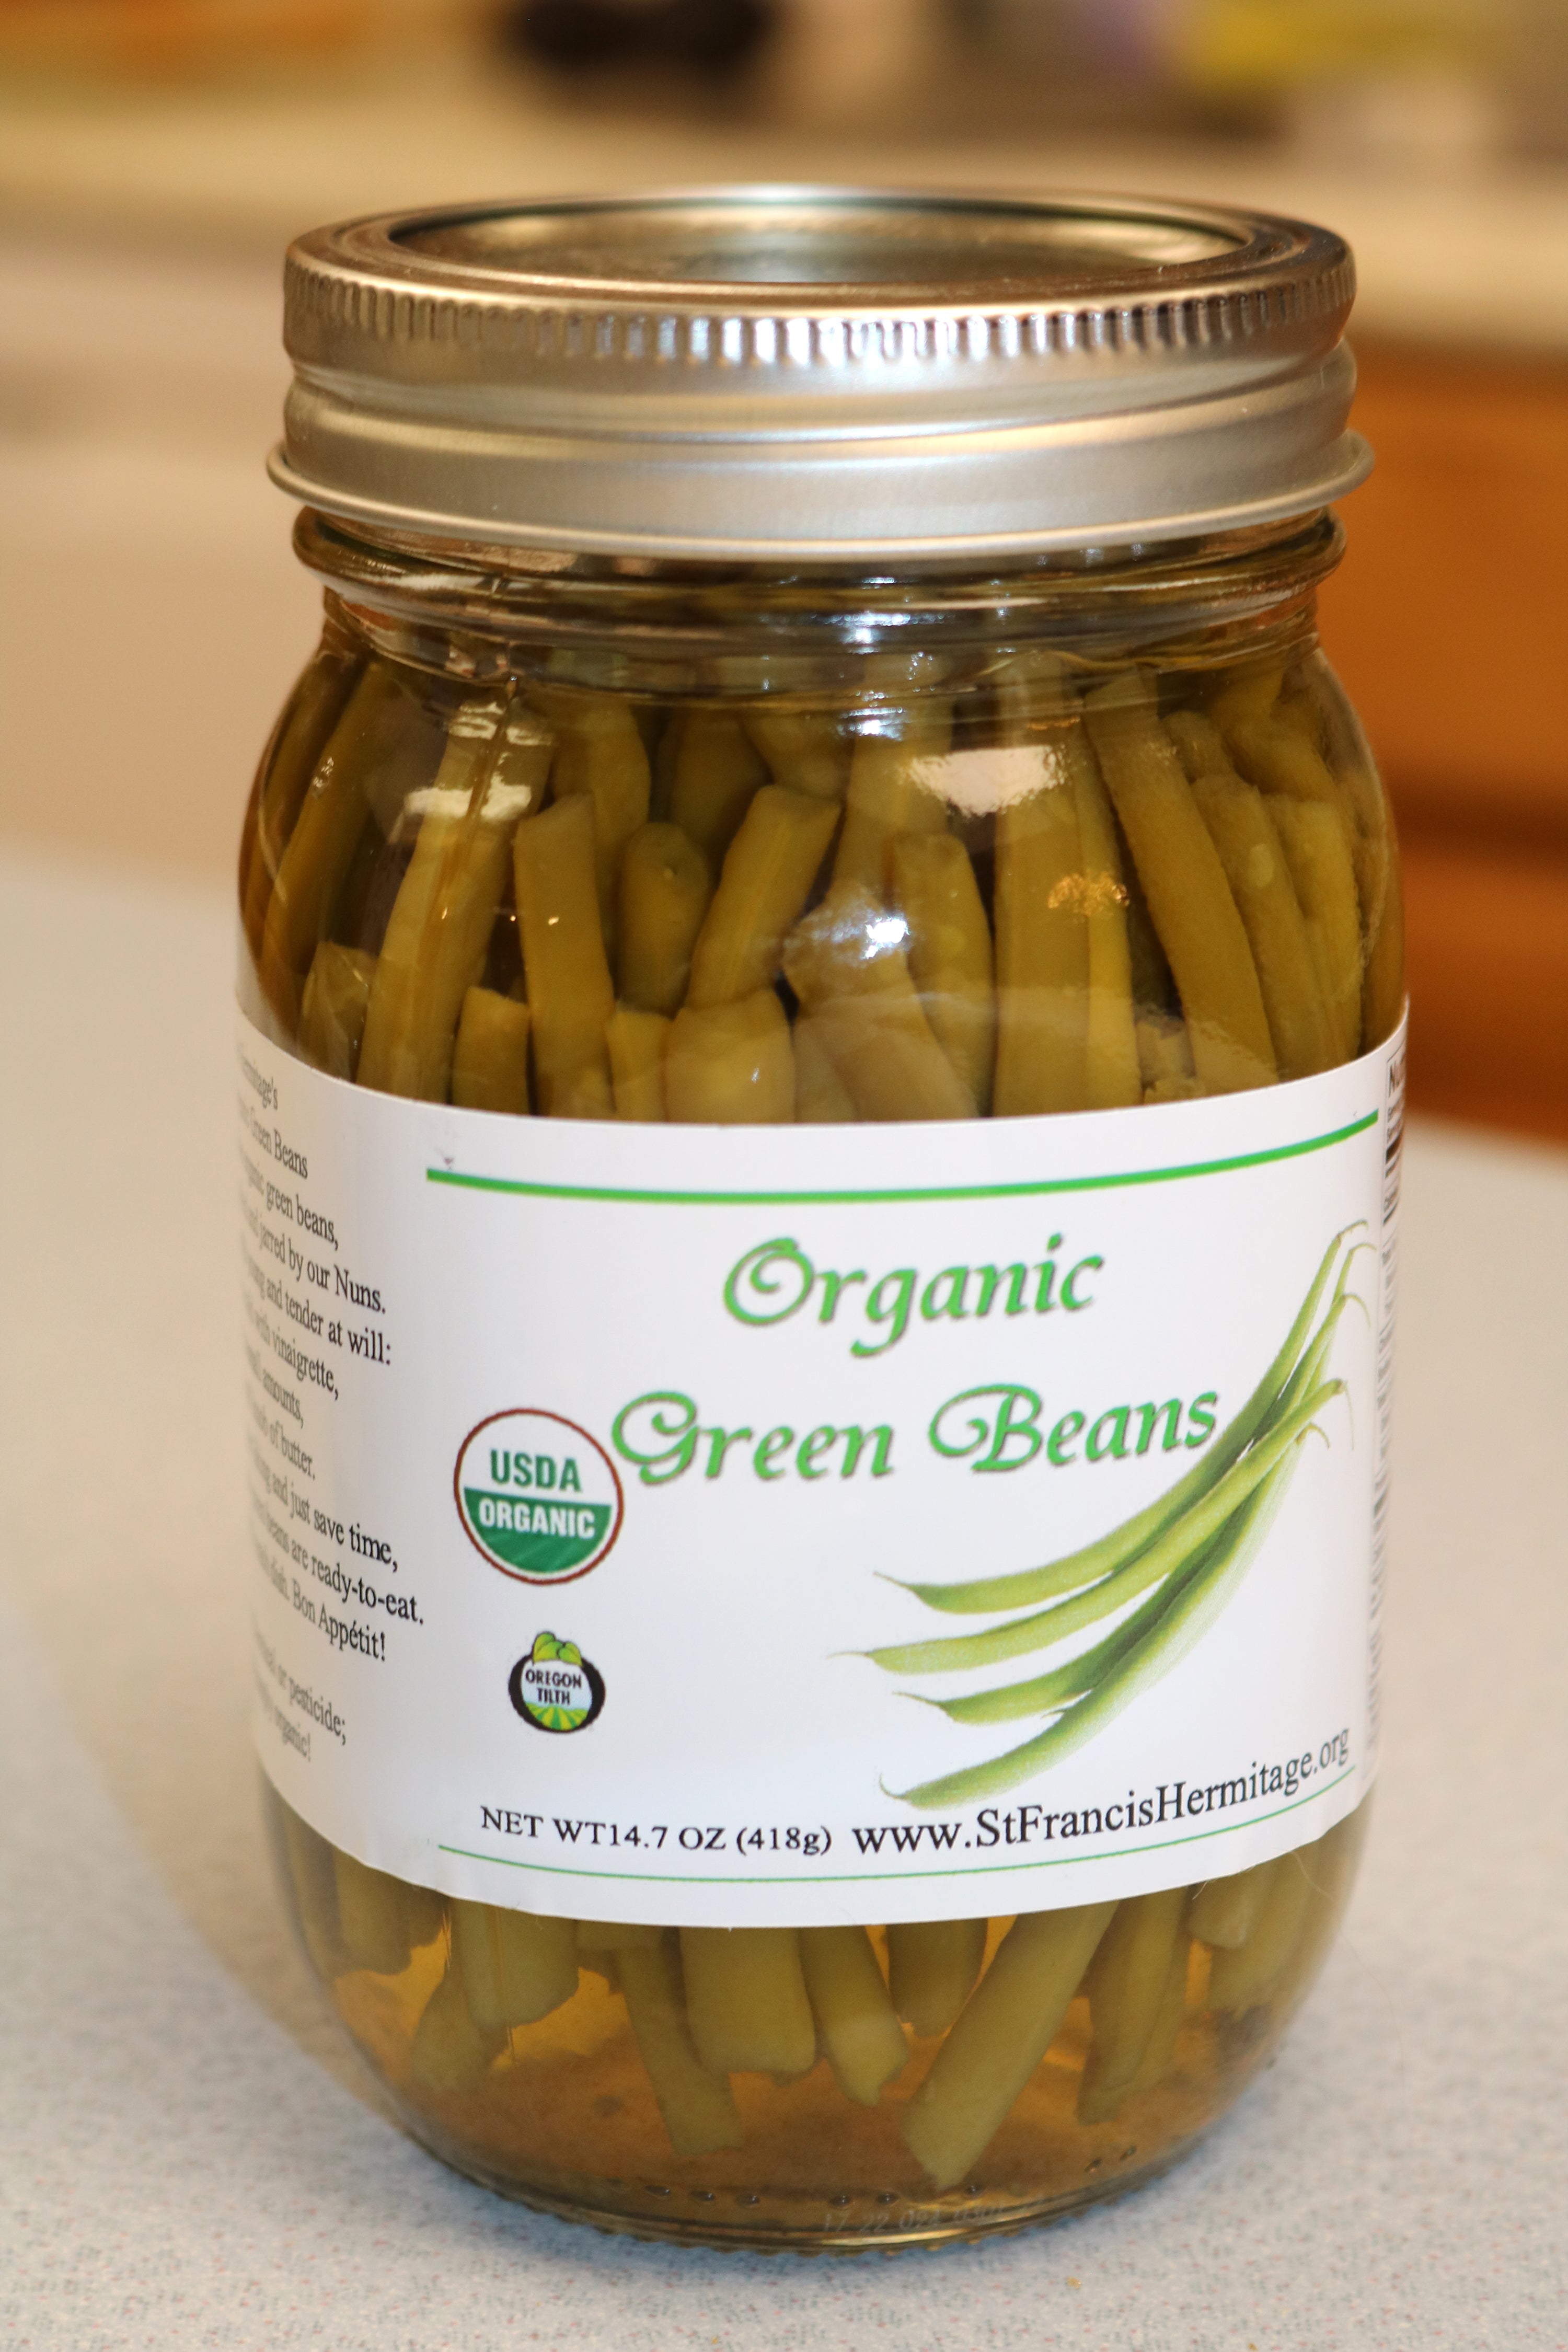 Organic Green Beans from St Francis' Hermitage